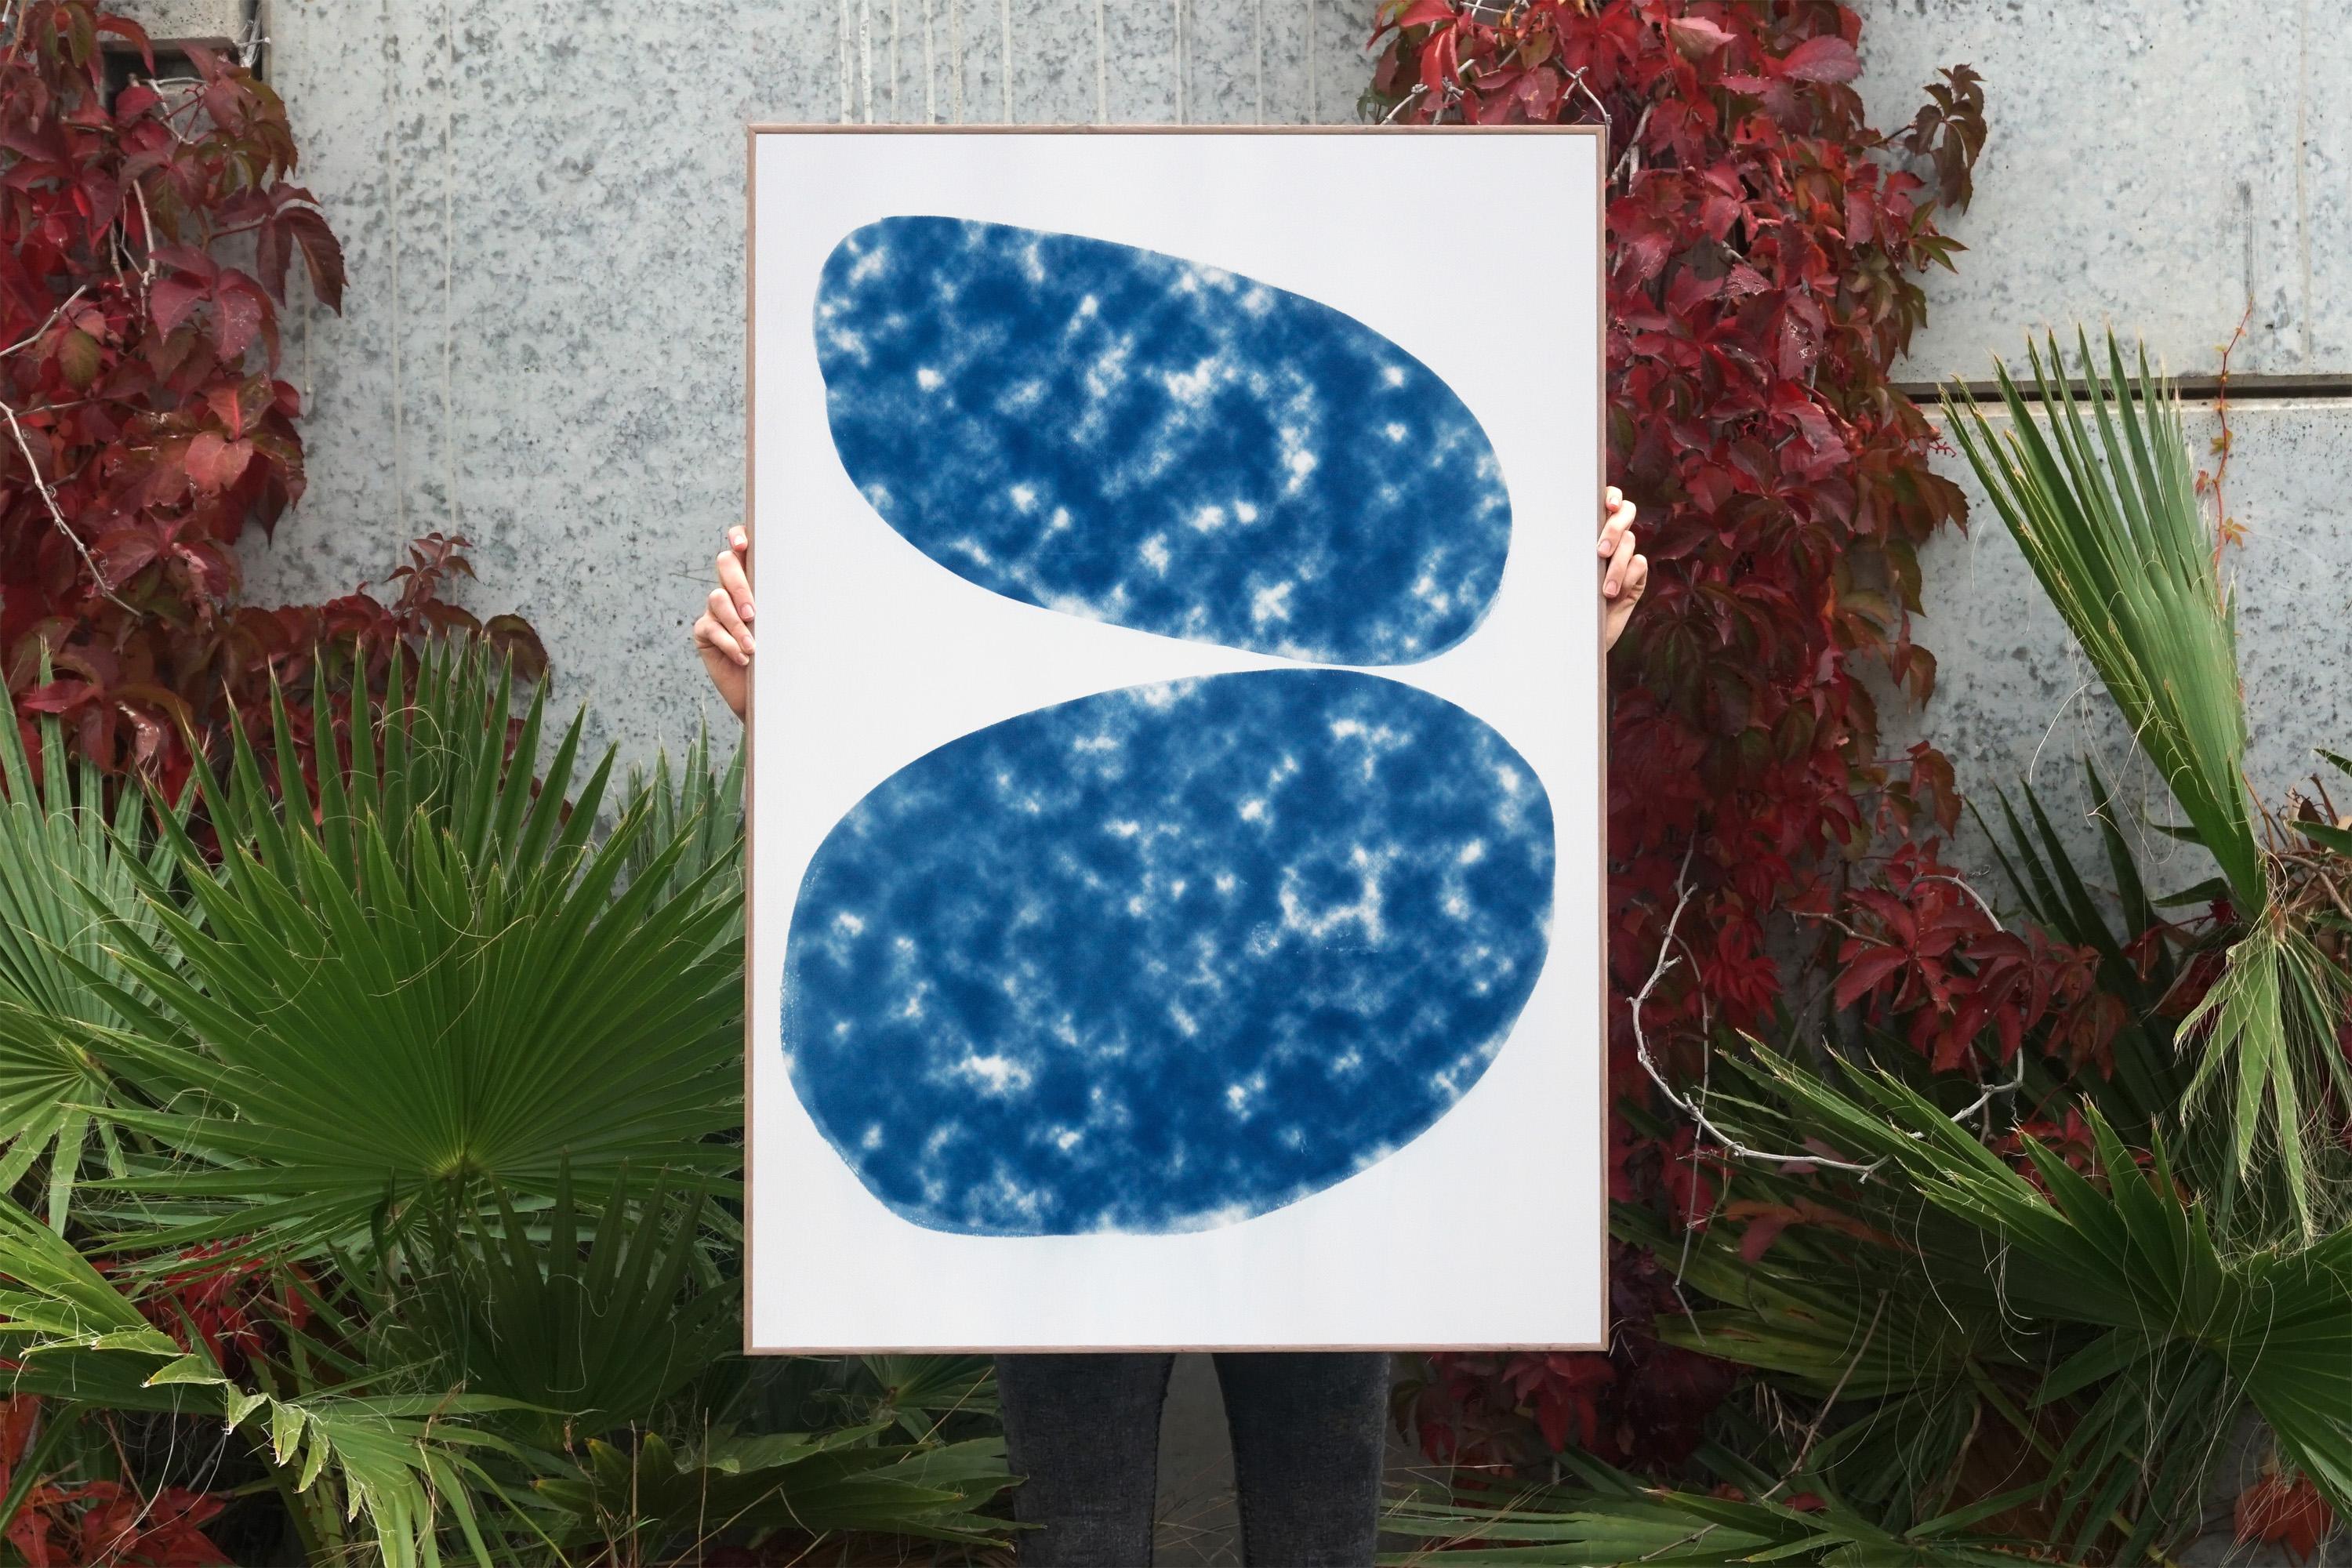 Cloudy Ovals, Cyanotype on Paper 100x70cm, Classic Blue, Abstract Geometric 2020 - Photograph by Kind of Cyan